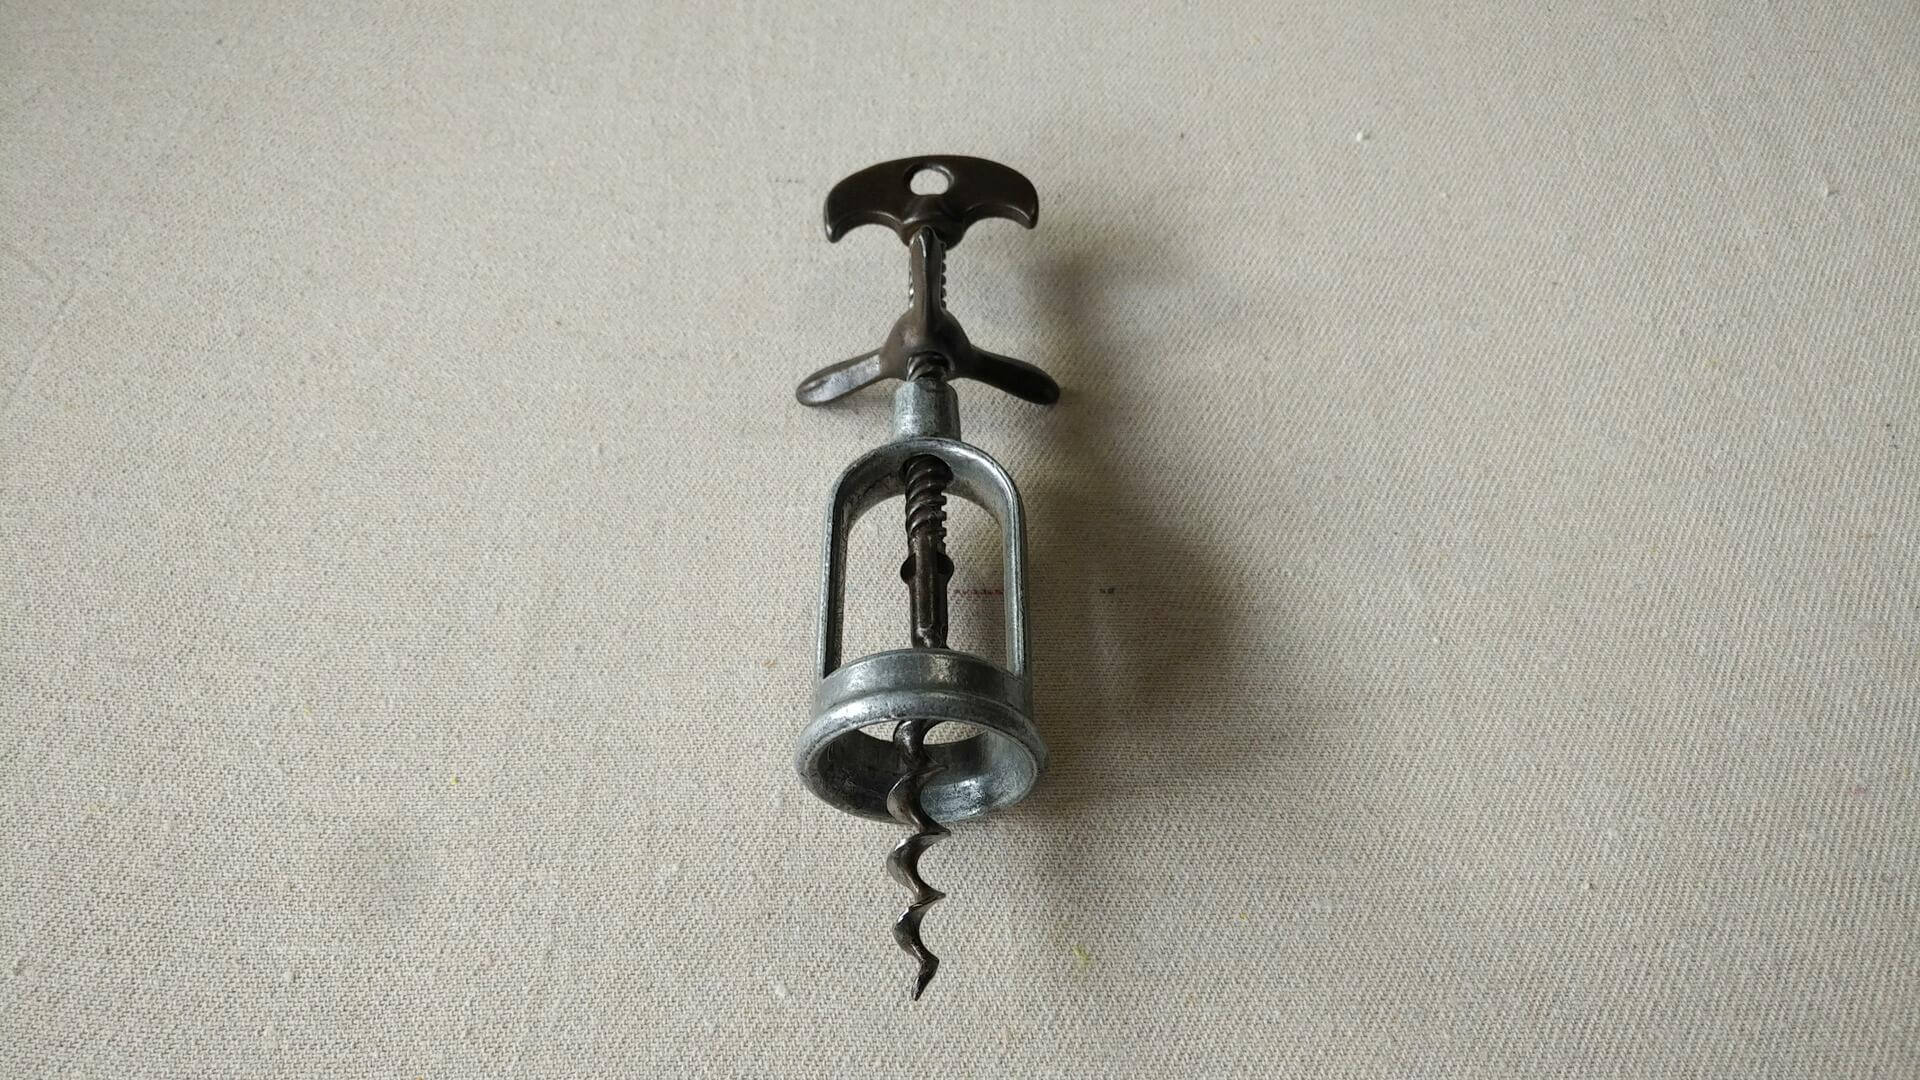 antique-napoleon-hat-french-fixed-wingnut-open-frame-corkscrew-wine-bottle-opener-vintage-barware-breweriana-rare-collectible